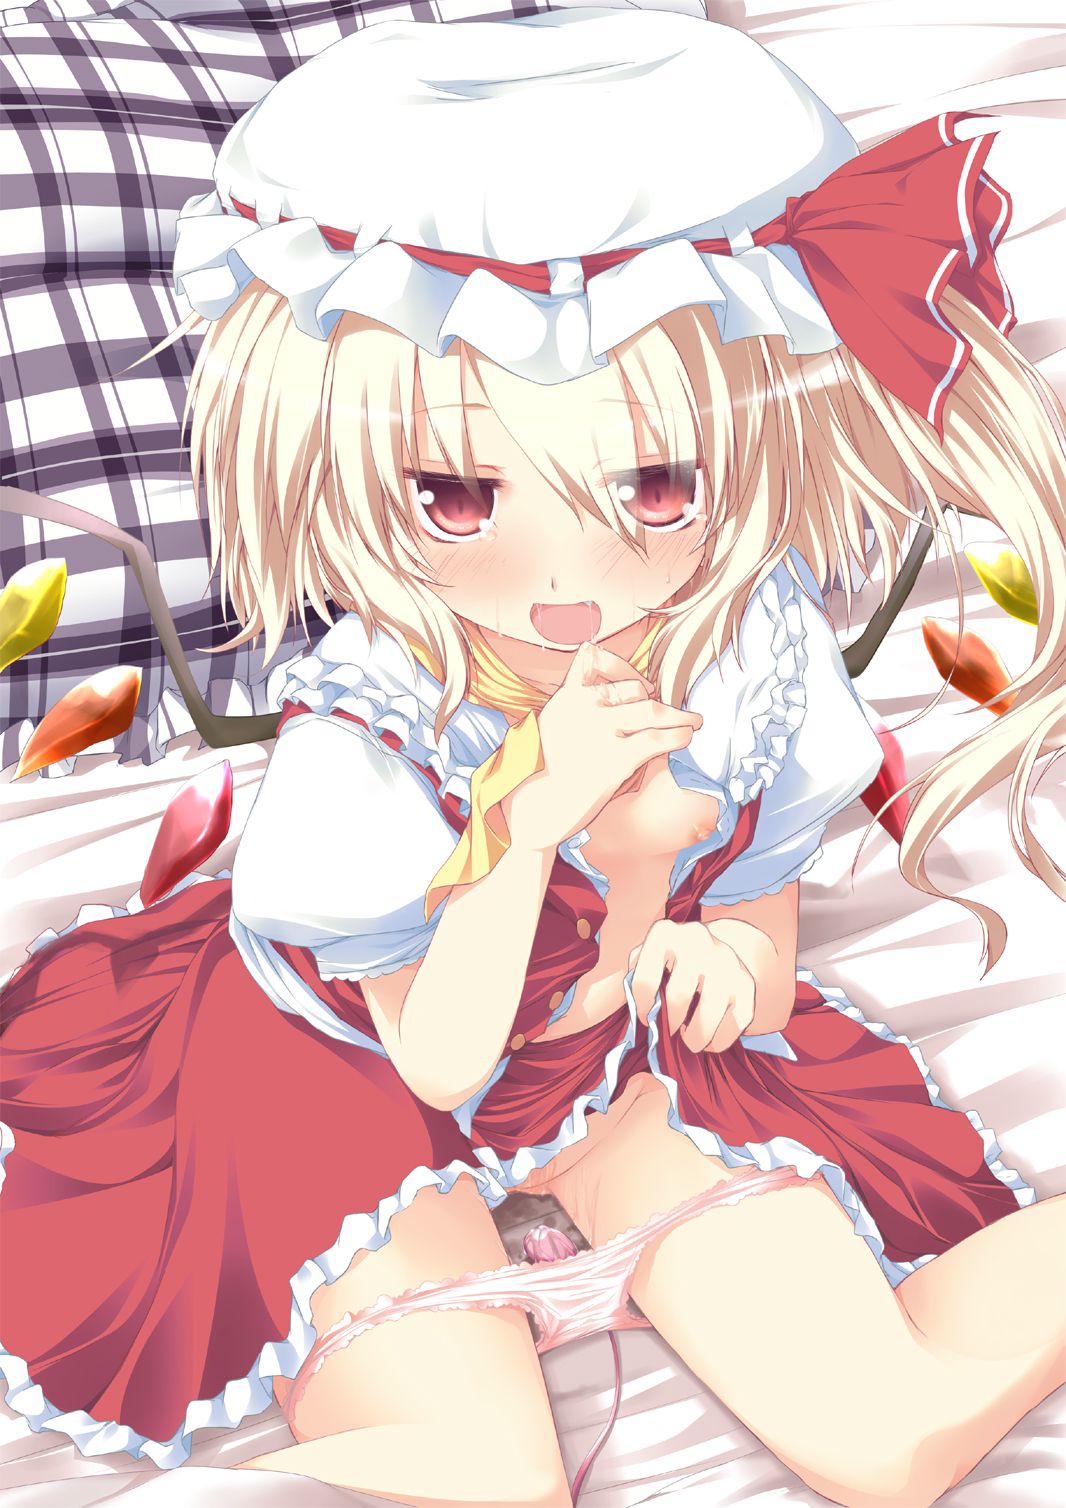 Secondary images in the [Eastern] Flandre Scarlet part 1 50 sheets [erotic and non-erotic] 24